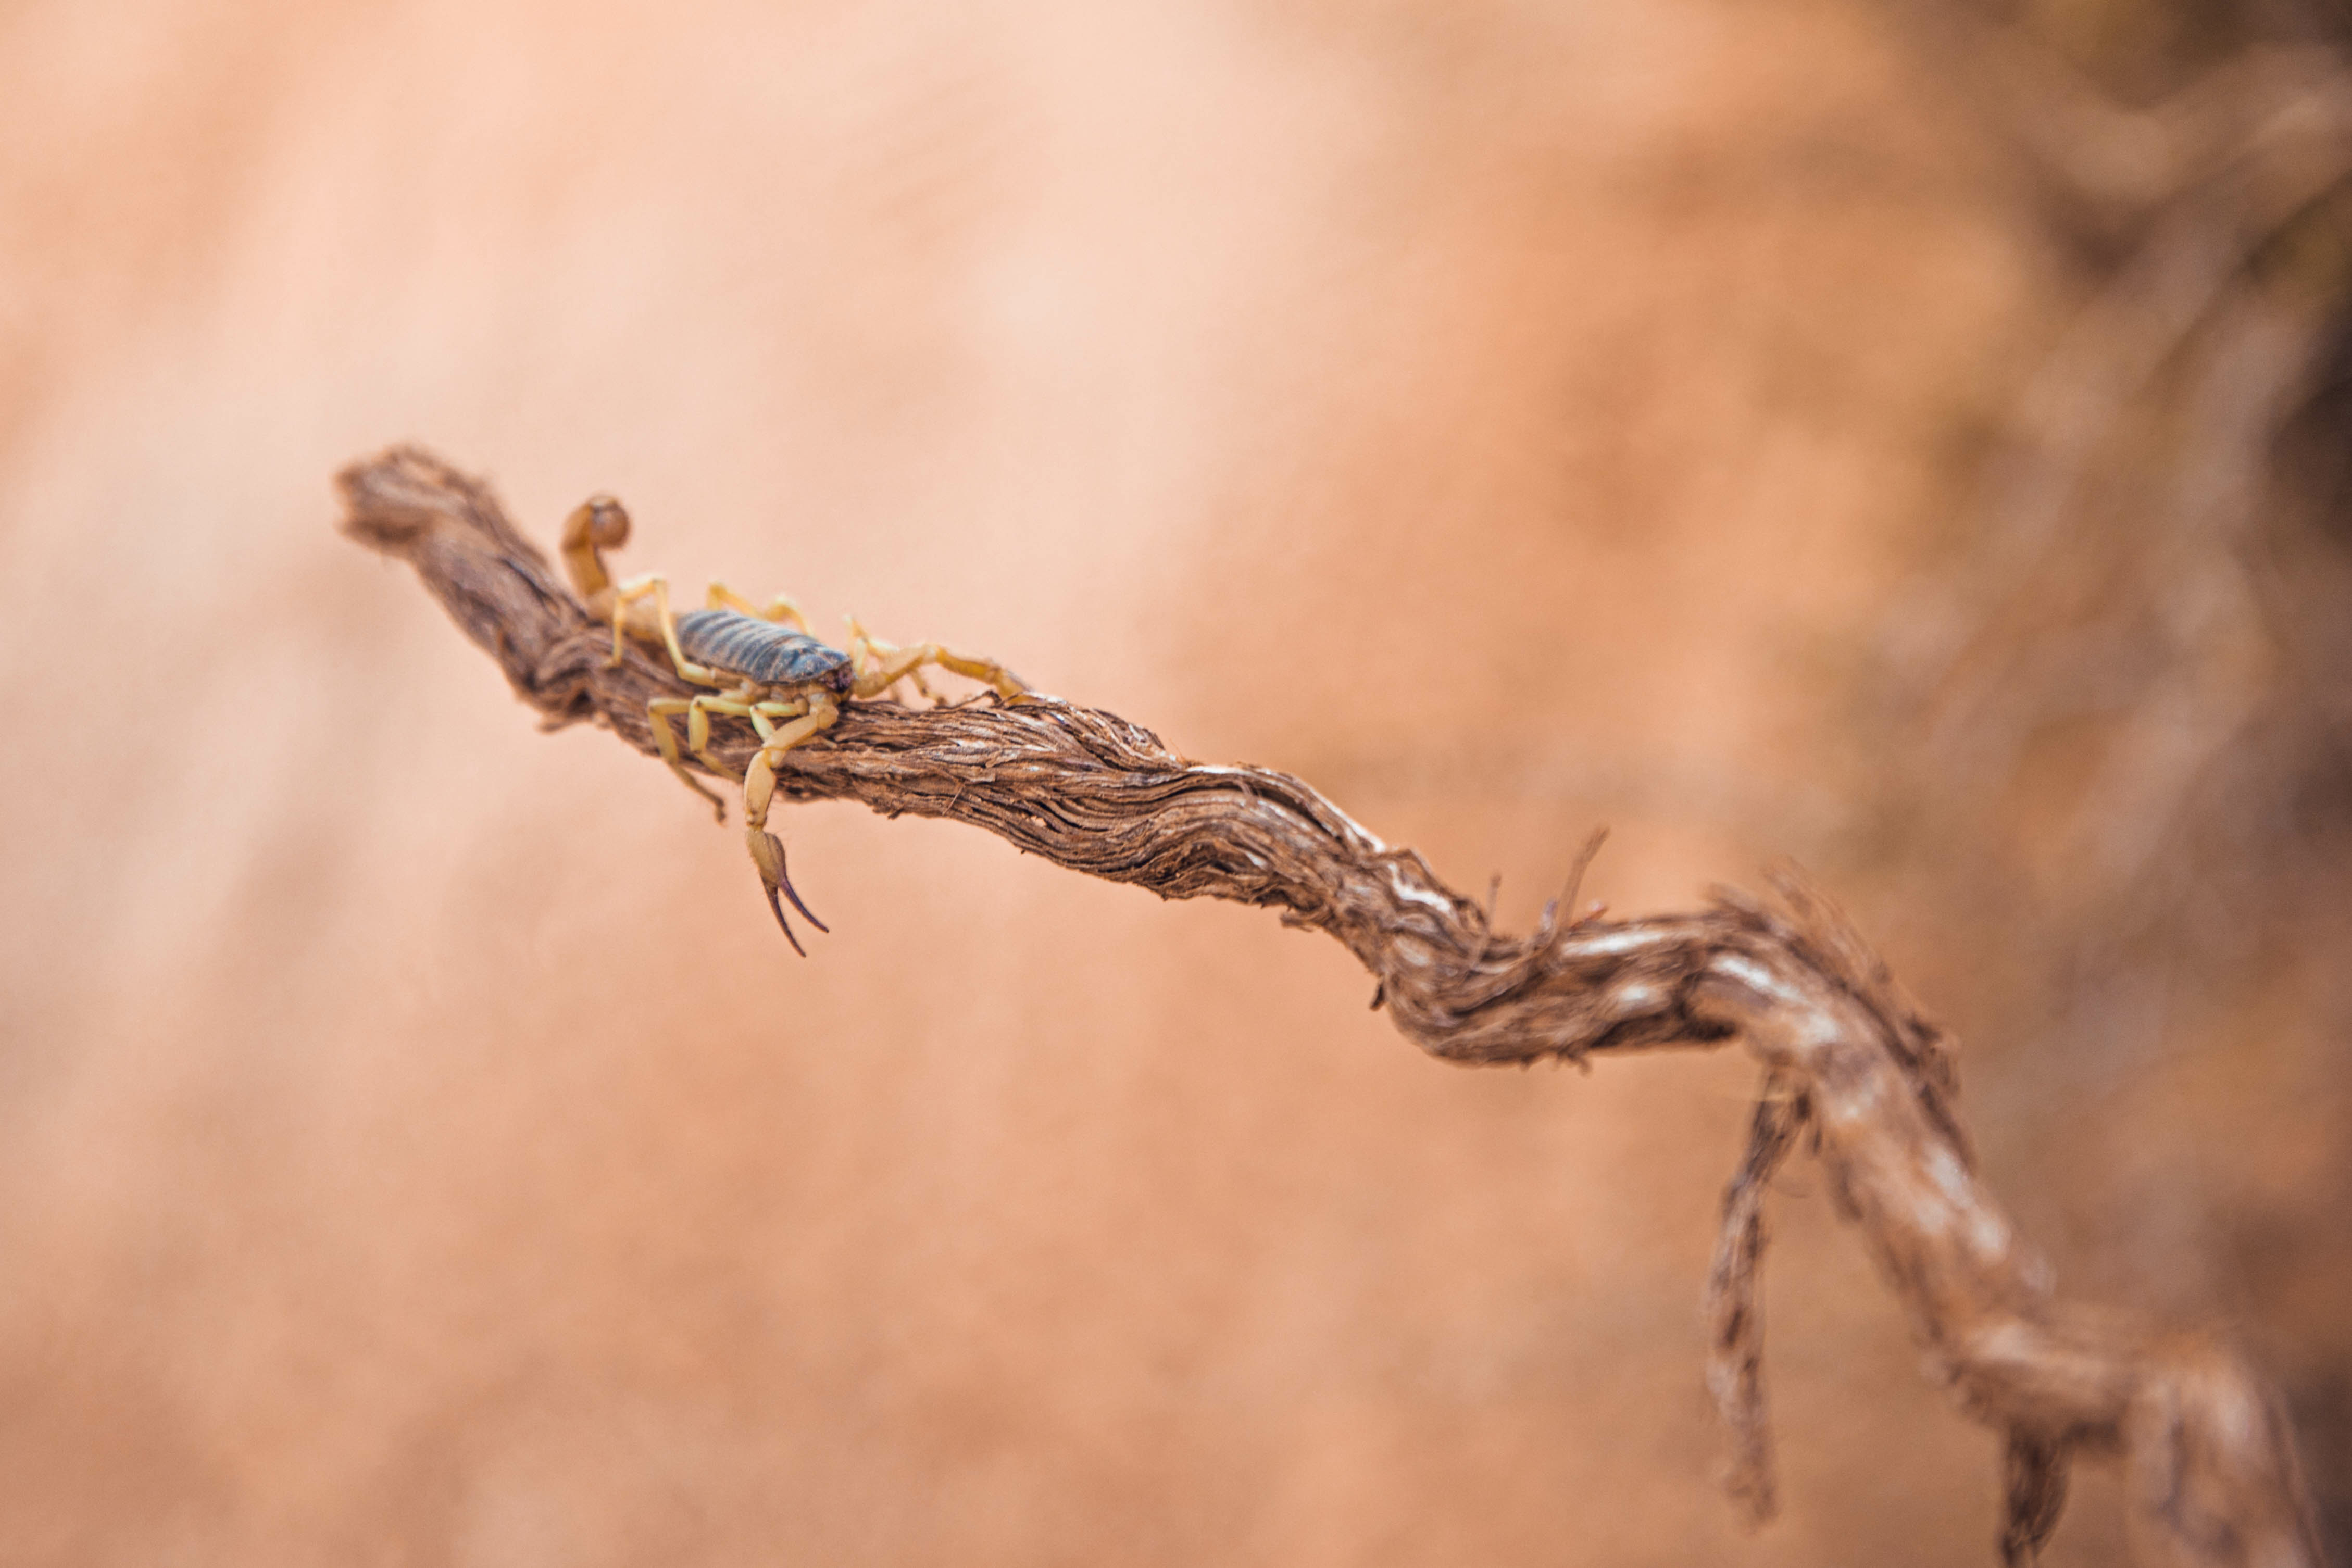 A scorpion in Zion National Park.